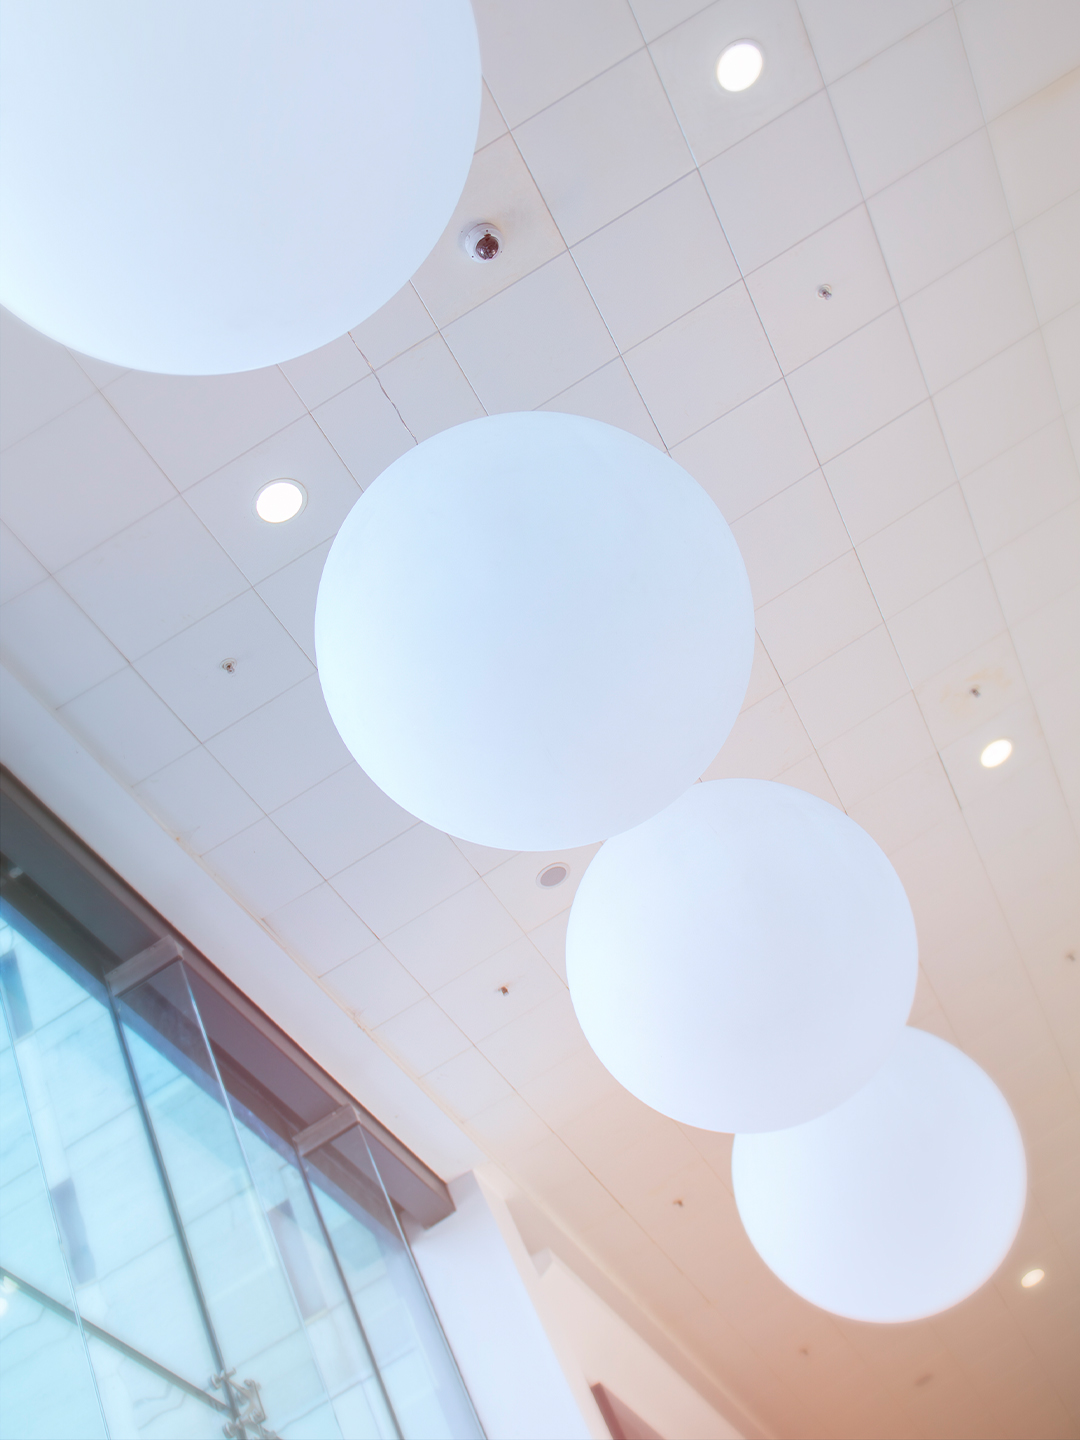 A row of orb light fixtures in Basildon's Eastgate Shopping Centre.